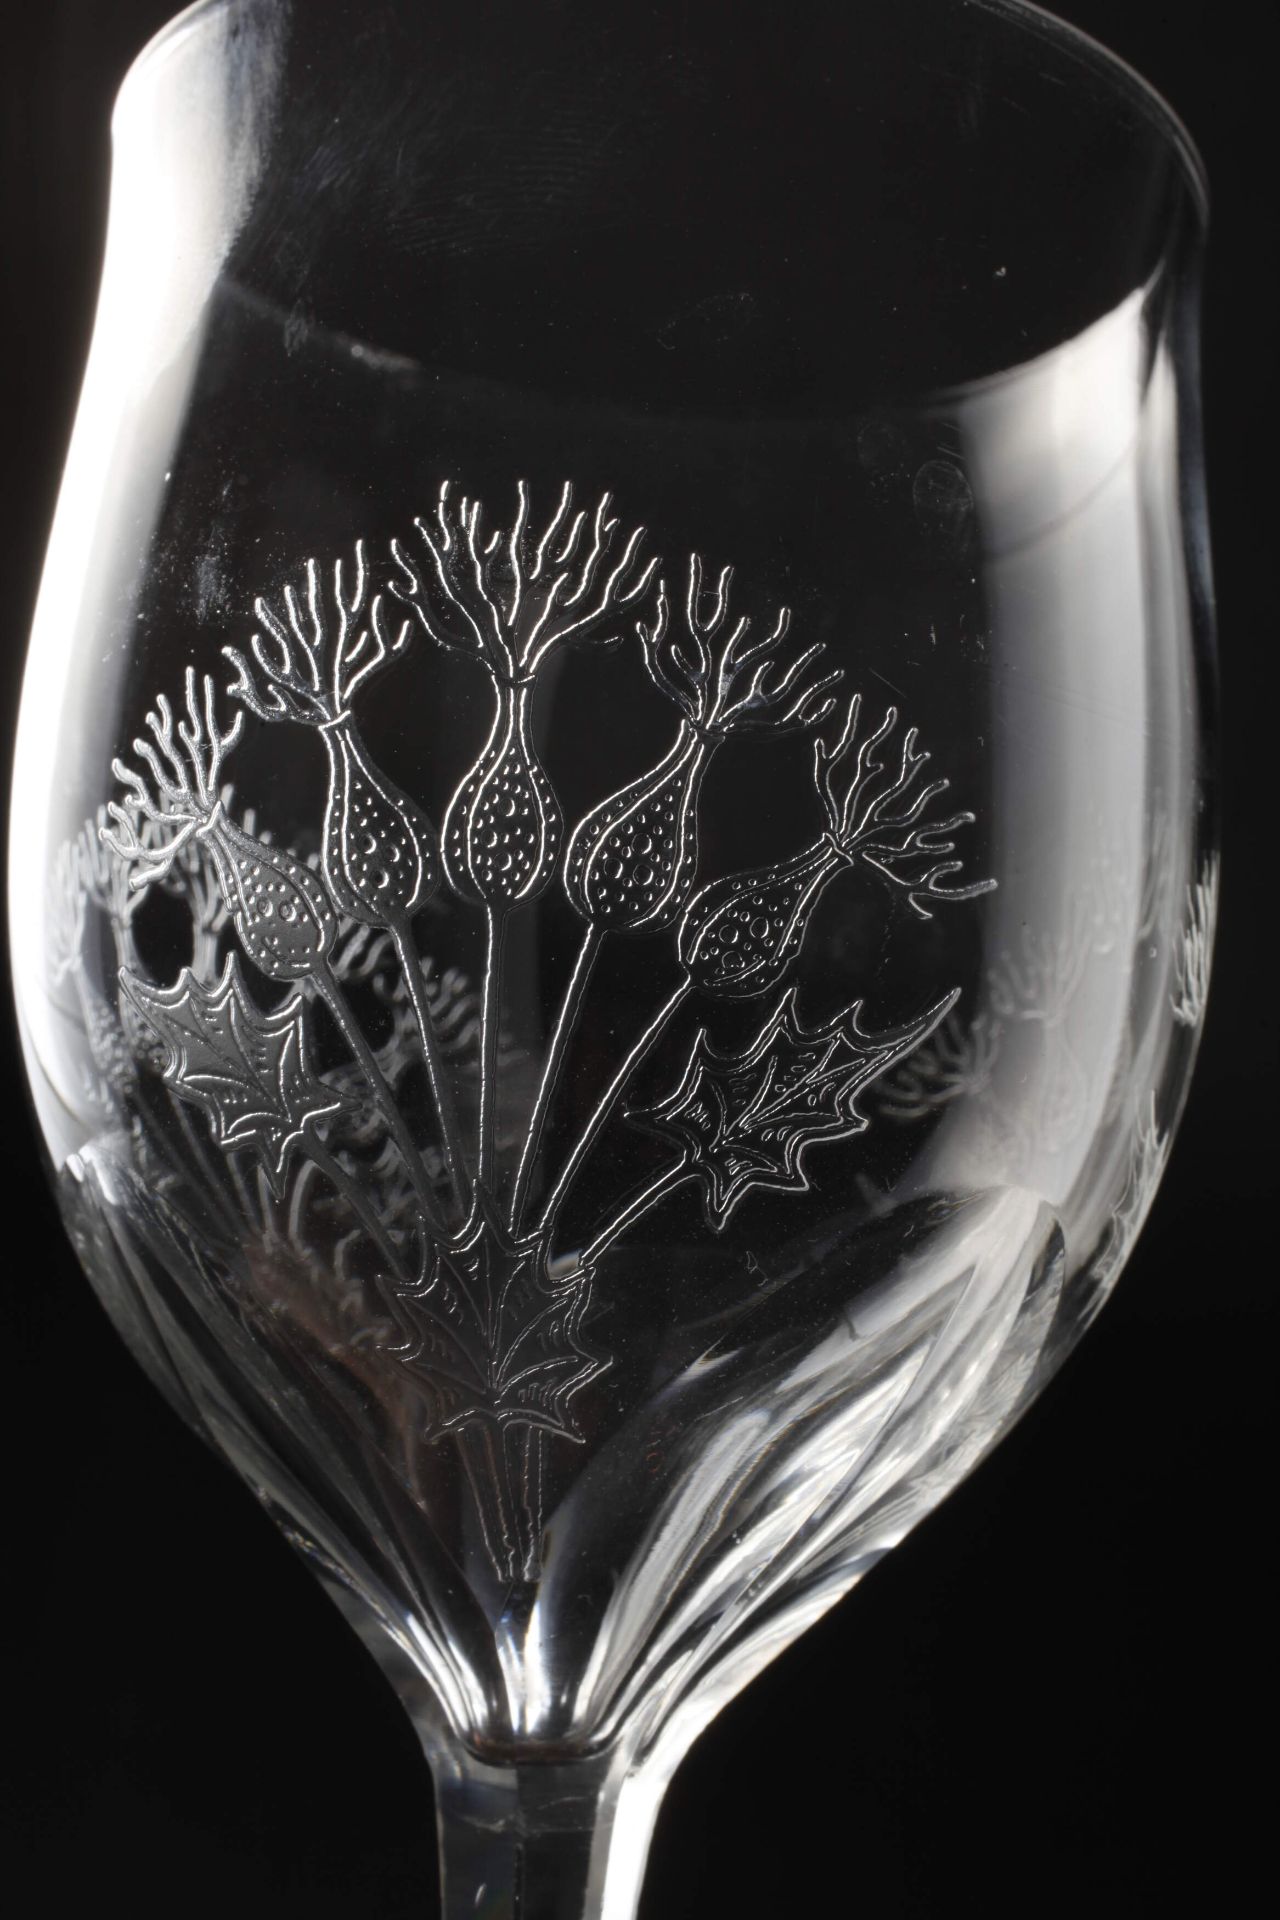 Five stemmed glasses with thistle decoration - Image 3 of 3